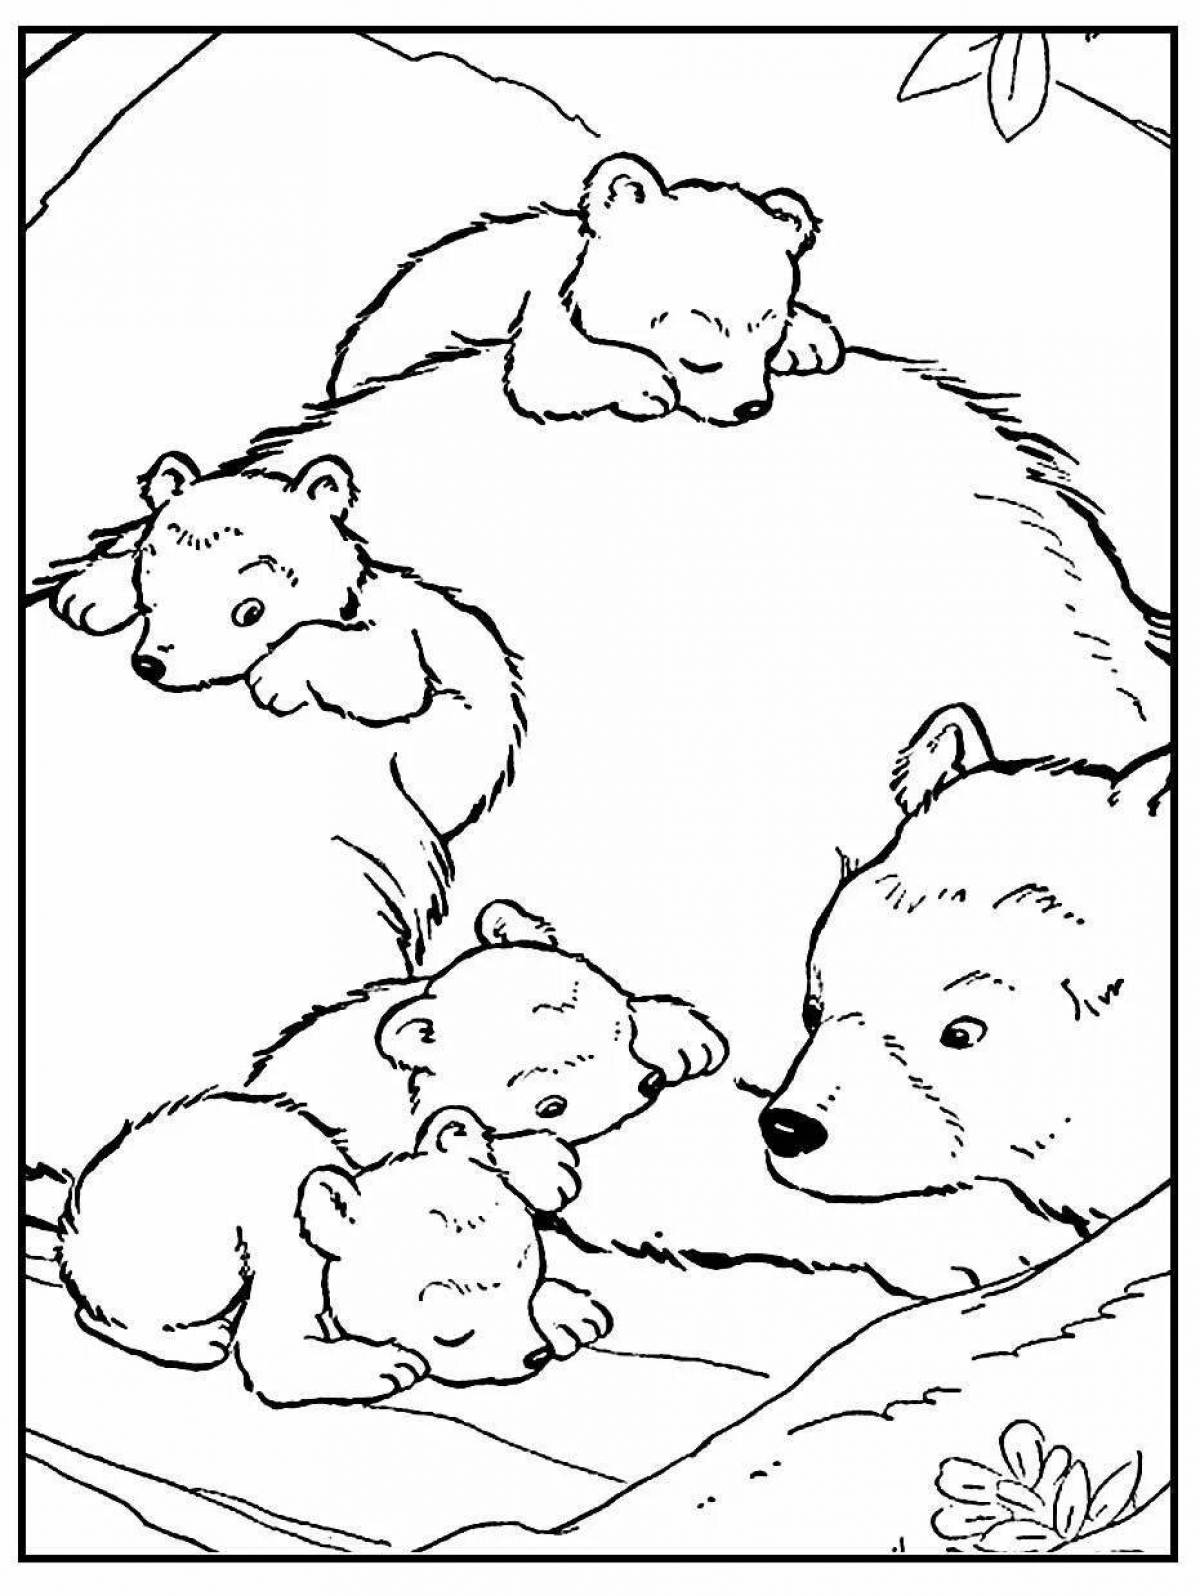 Coloring book family of smiling bears